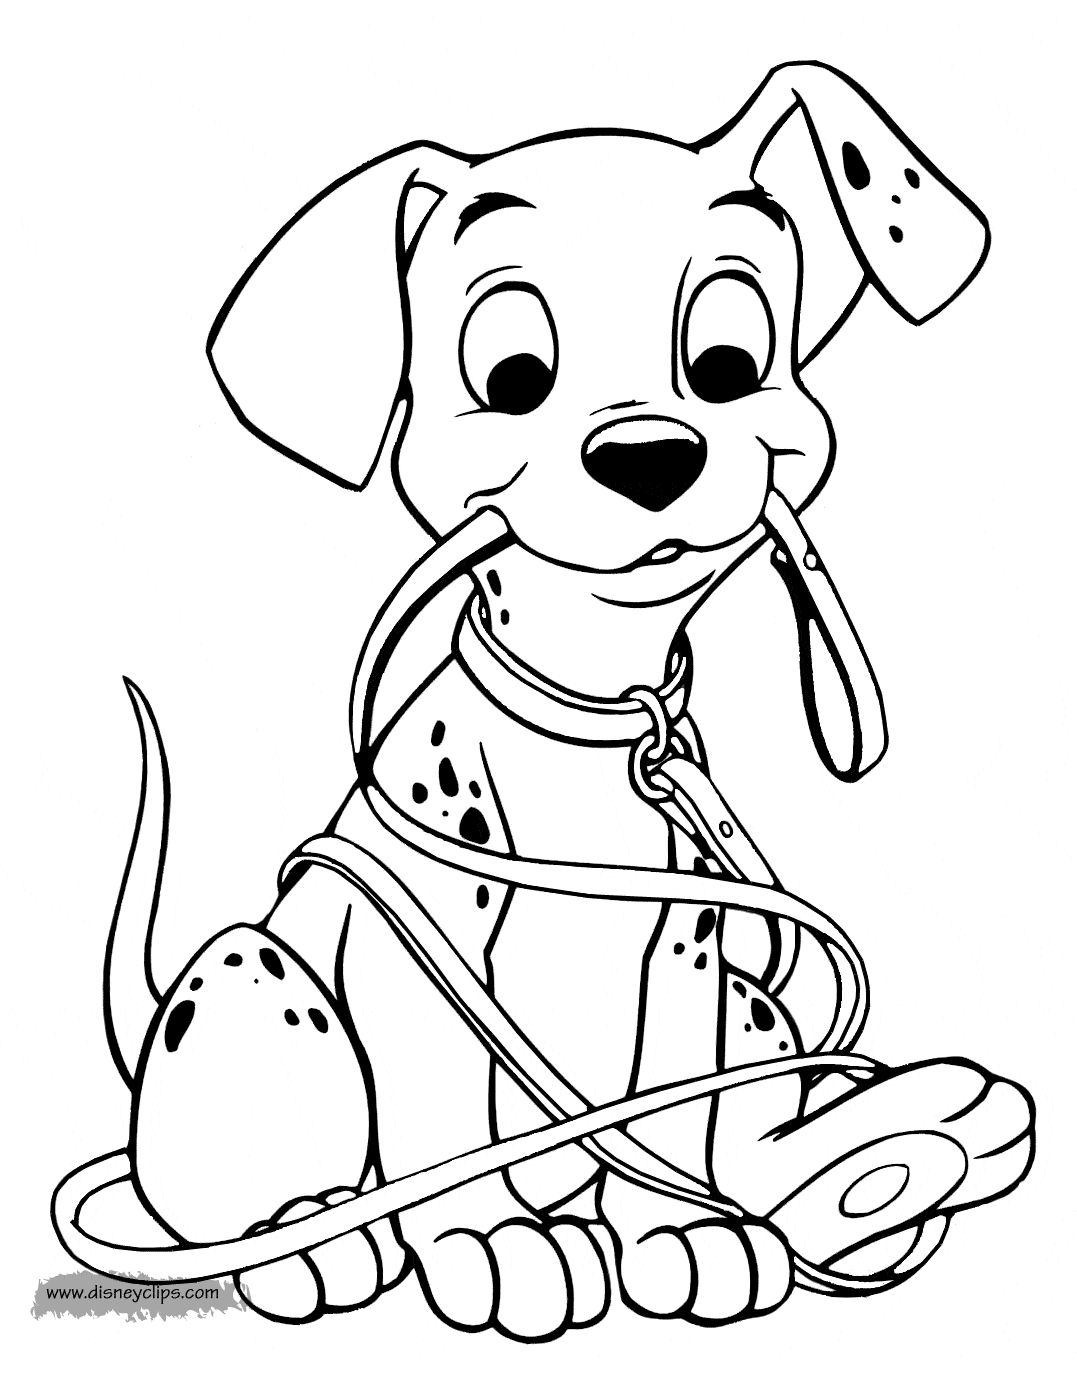 coloringpages free printable goofy coloring pages for kids coloringpages 